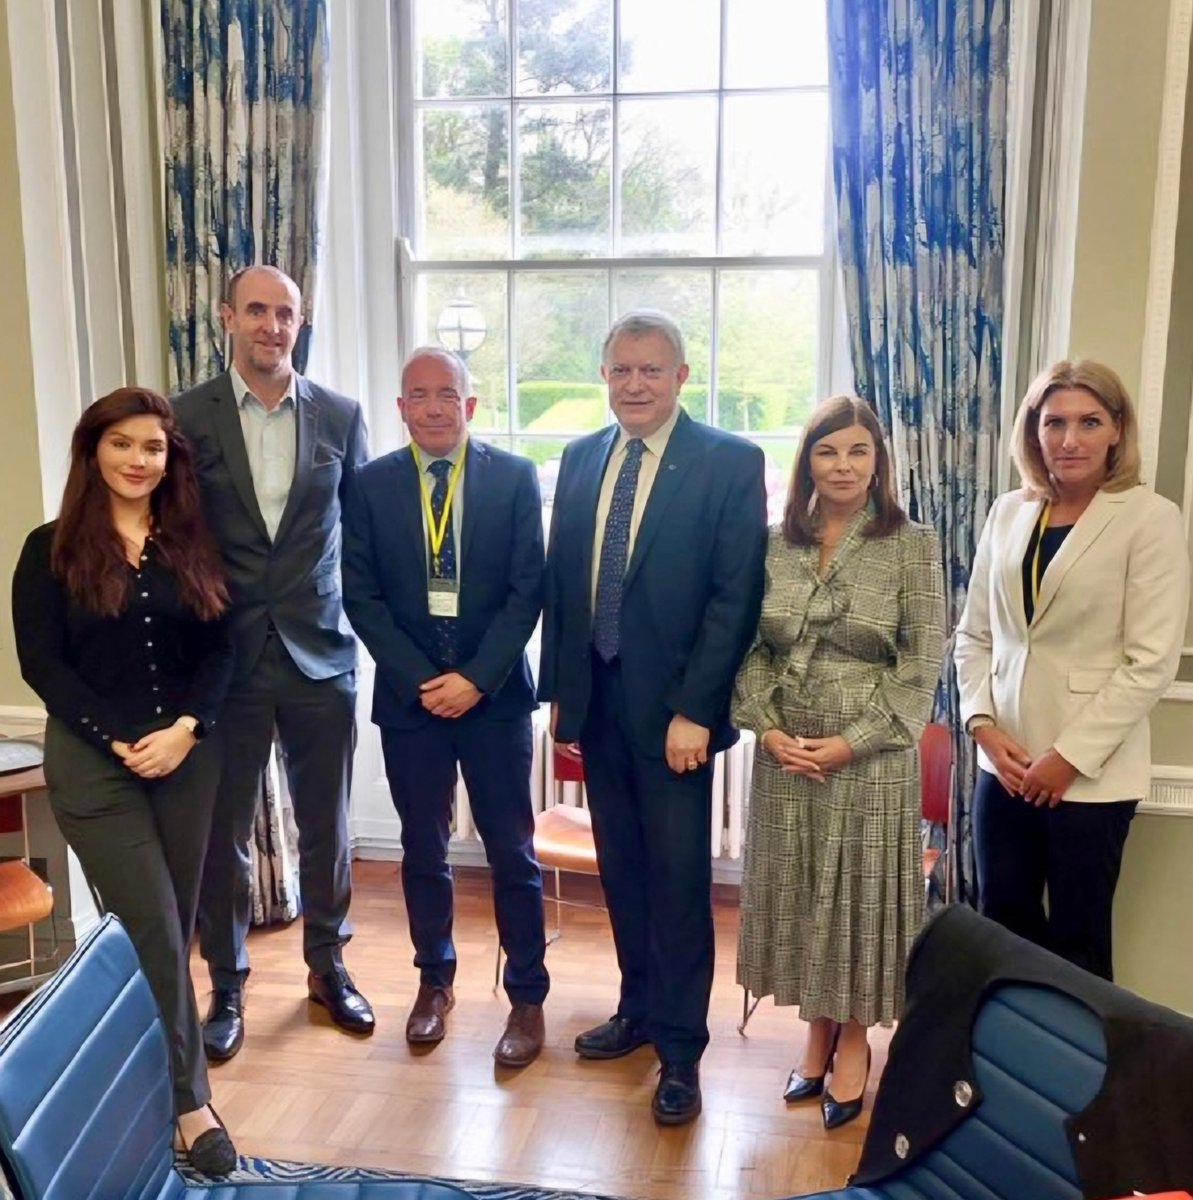 Good to meet with @NIElectricity's Derek Hynes & Edel Creery to discuss investment in our electricity network & EV charging points, particularly within Derry which has the worst provision across the UK. Vital we seek solutions to build a resilient & sustainable energy future.